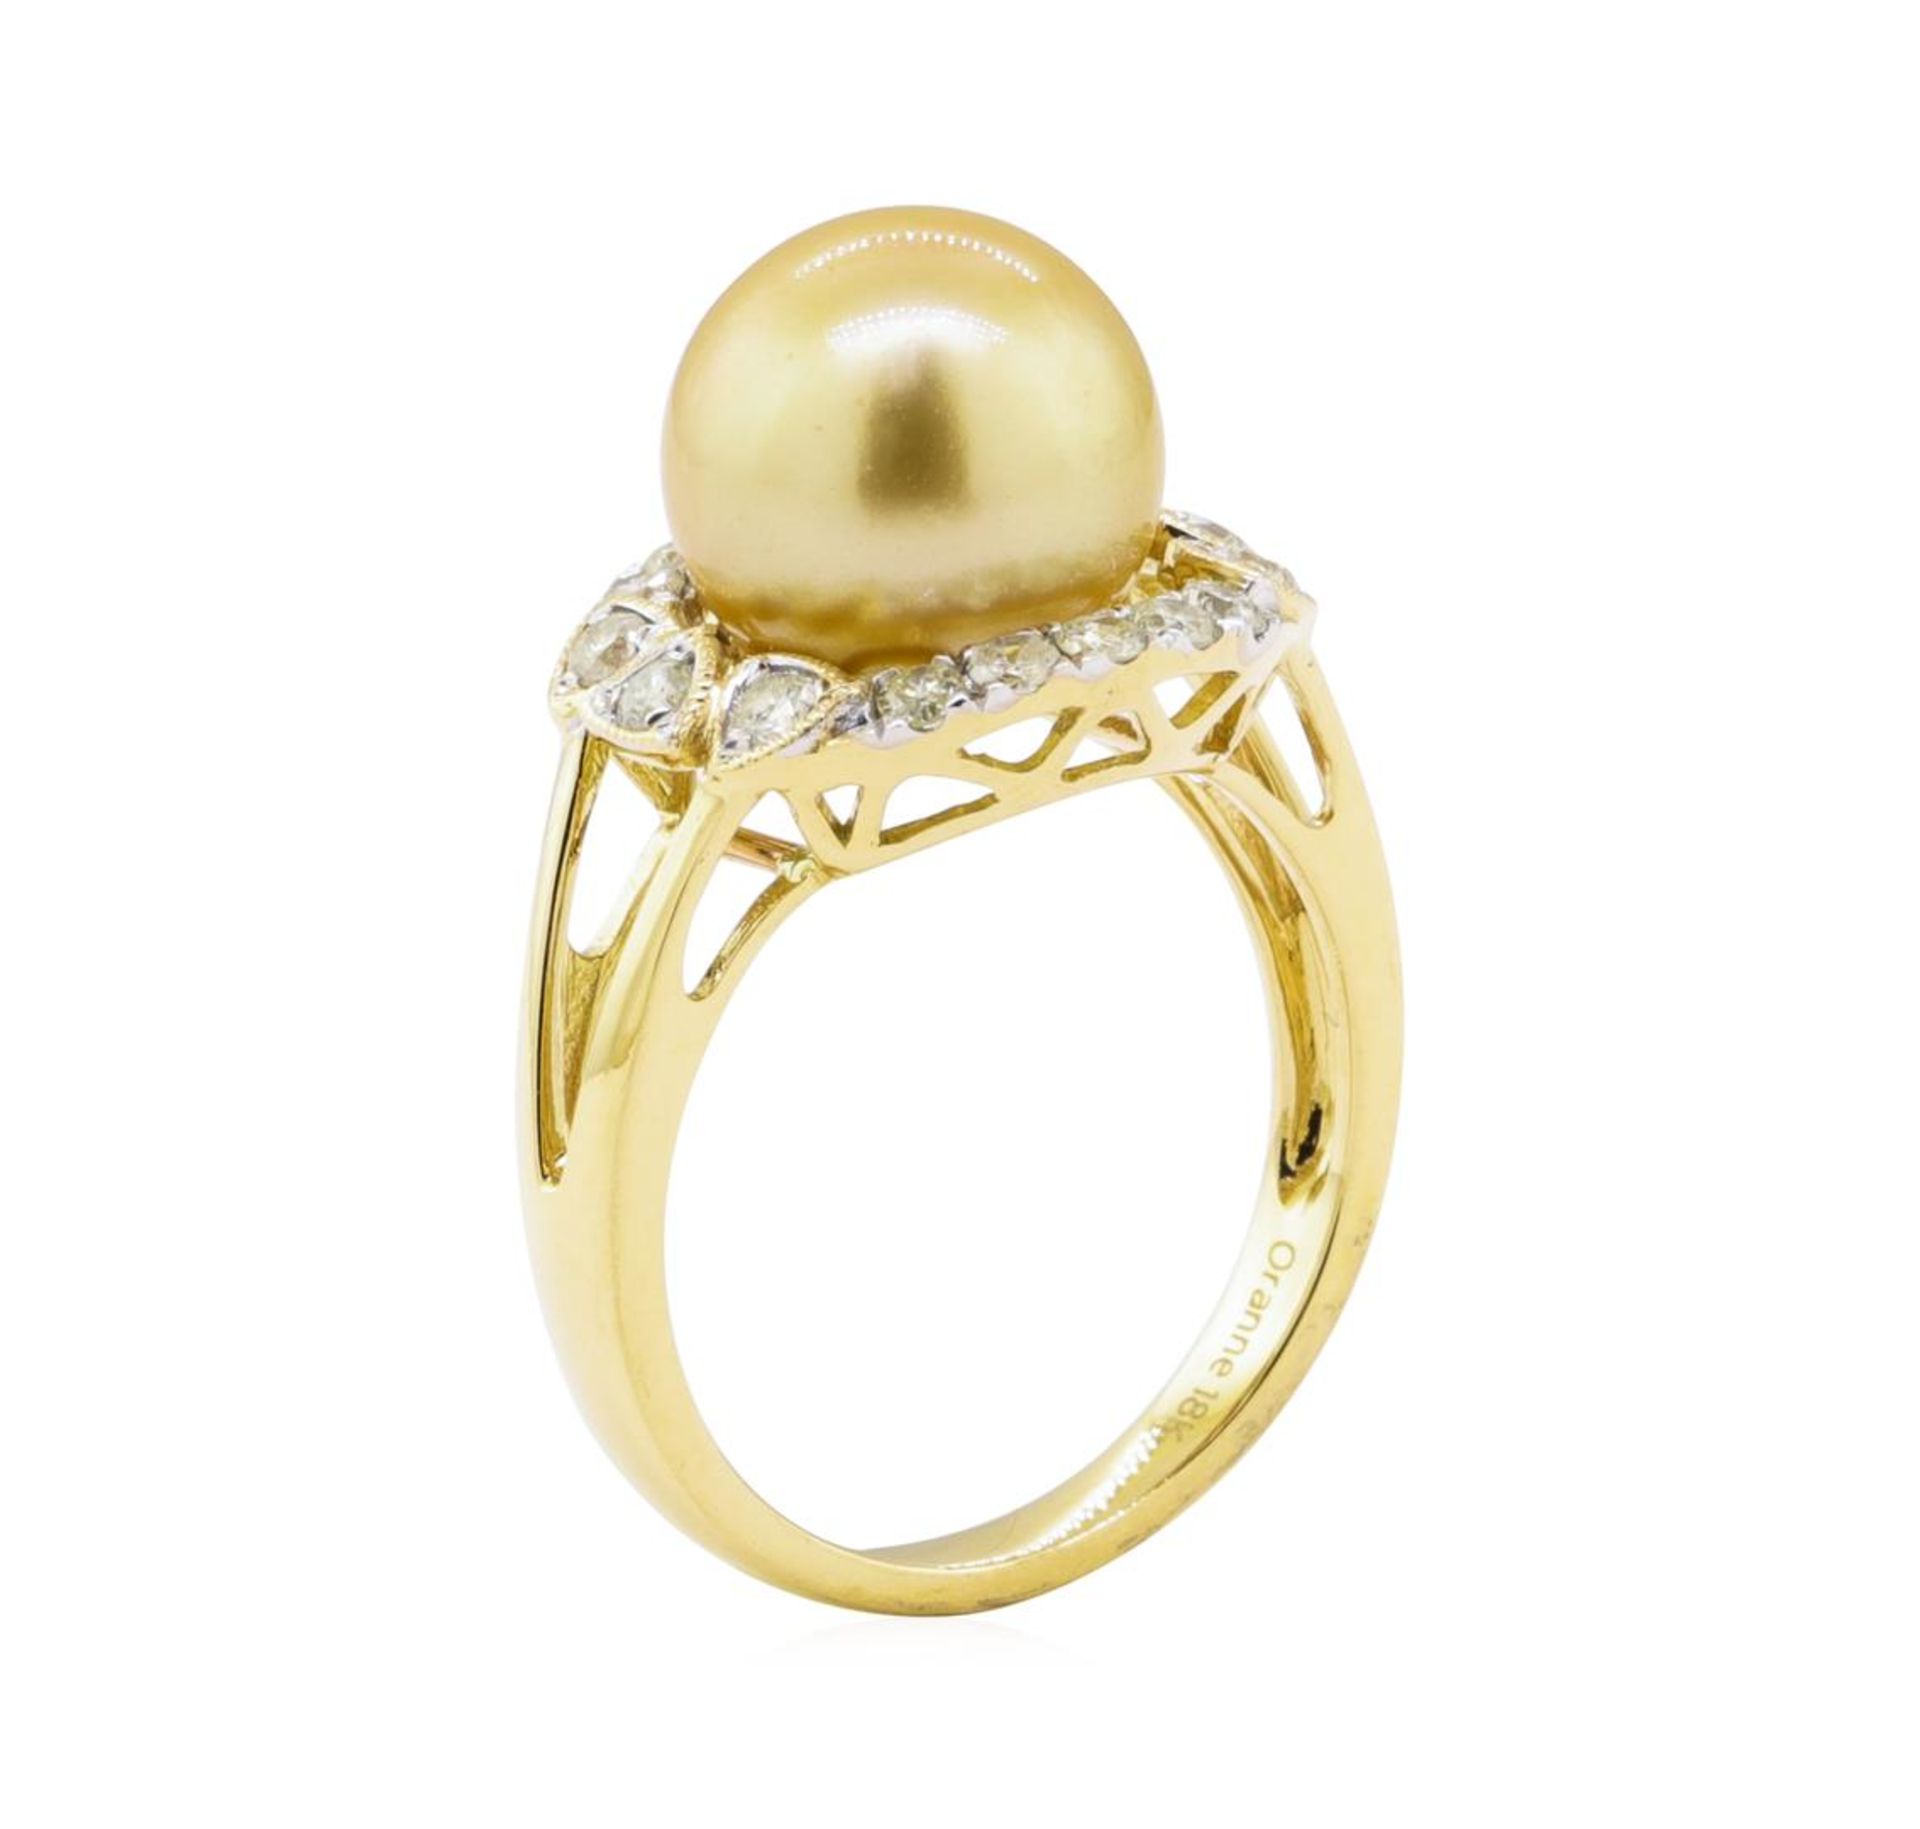 Pearl and Diamond Ring - 18KT Yellow Gold - Image 4 of 5